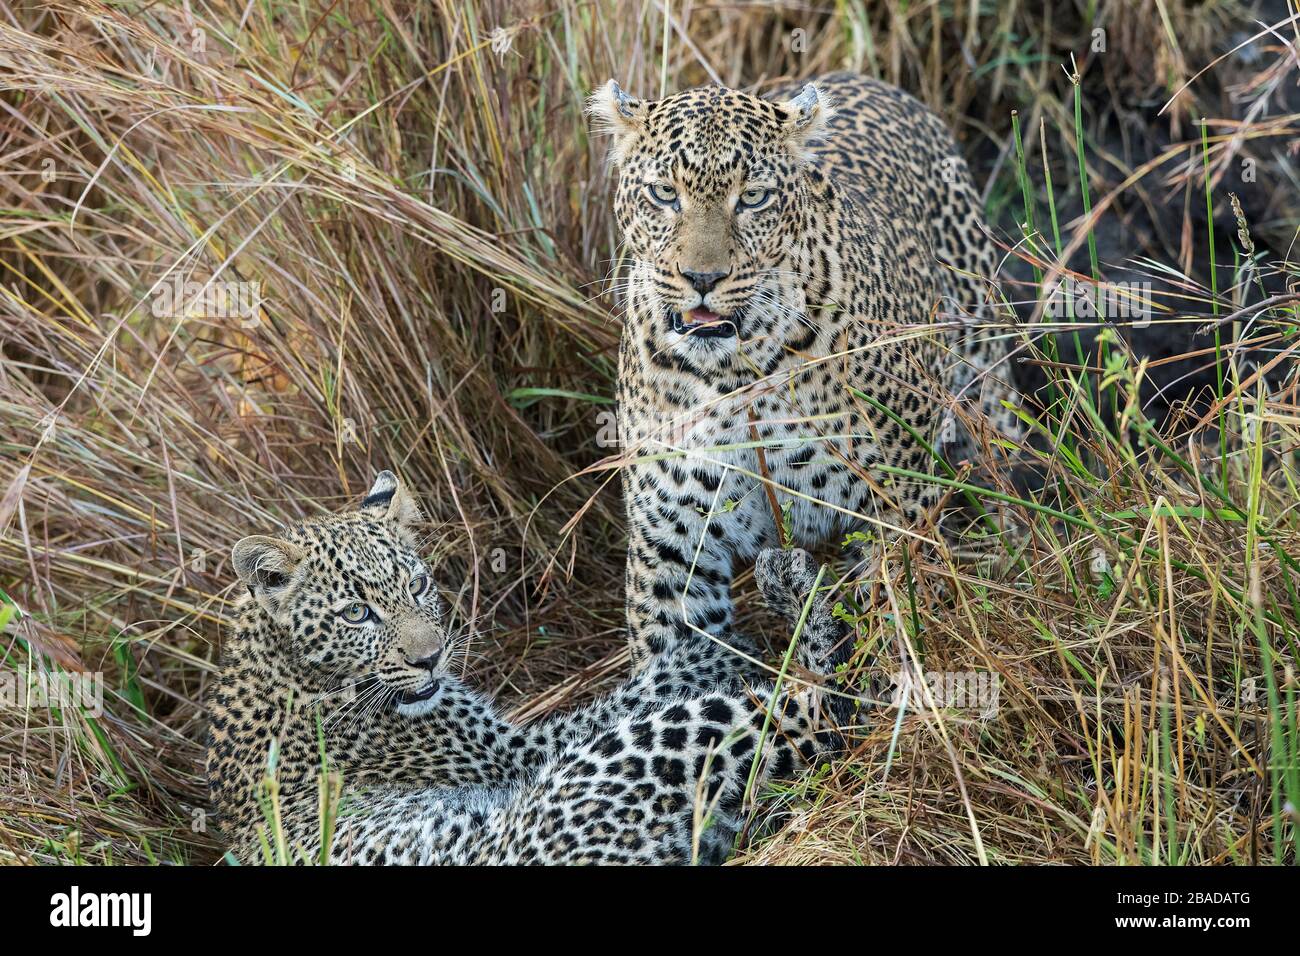 The image of Leopard (Panthera pardus) mother and cub in  Kenya, Masai Mara National Park - Stock Photo